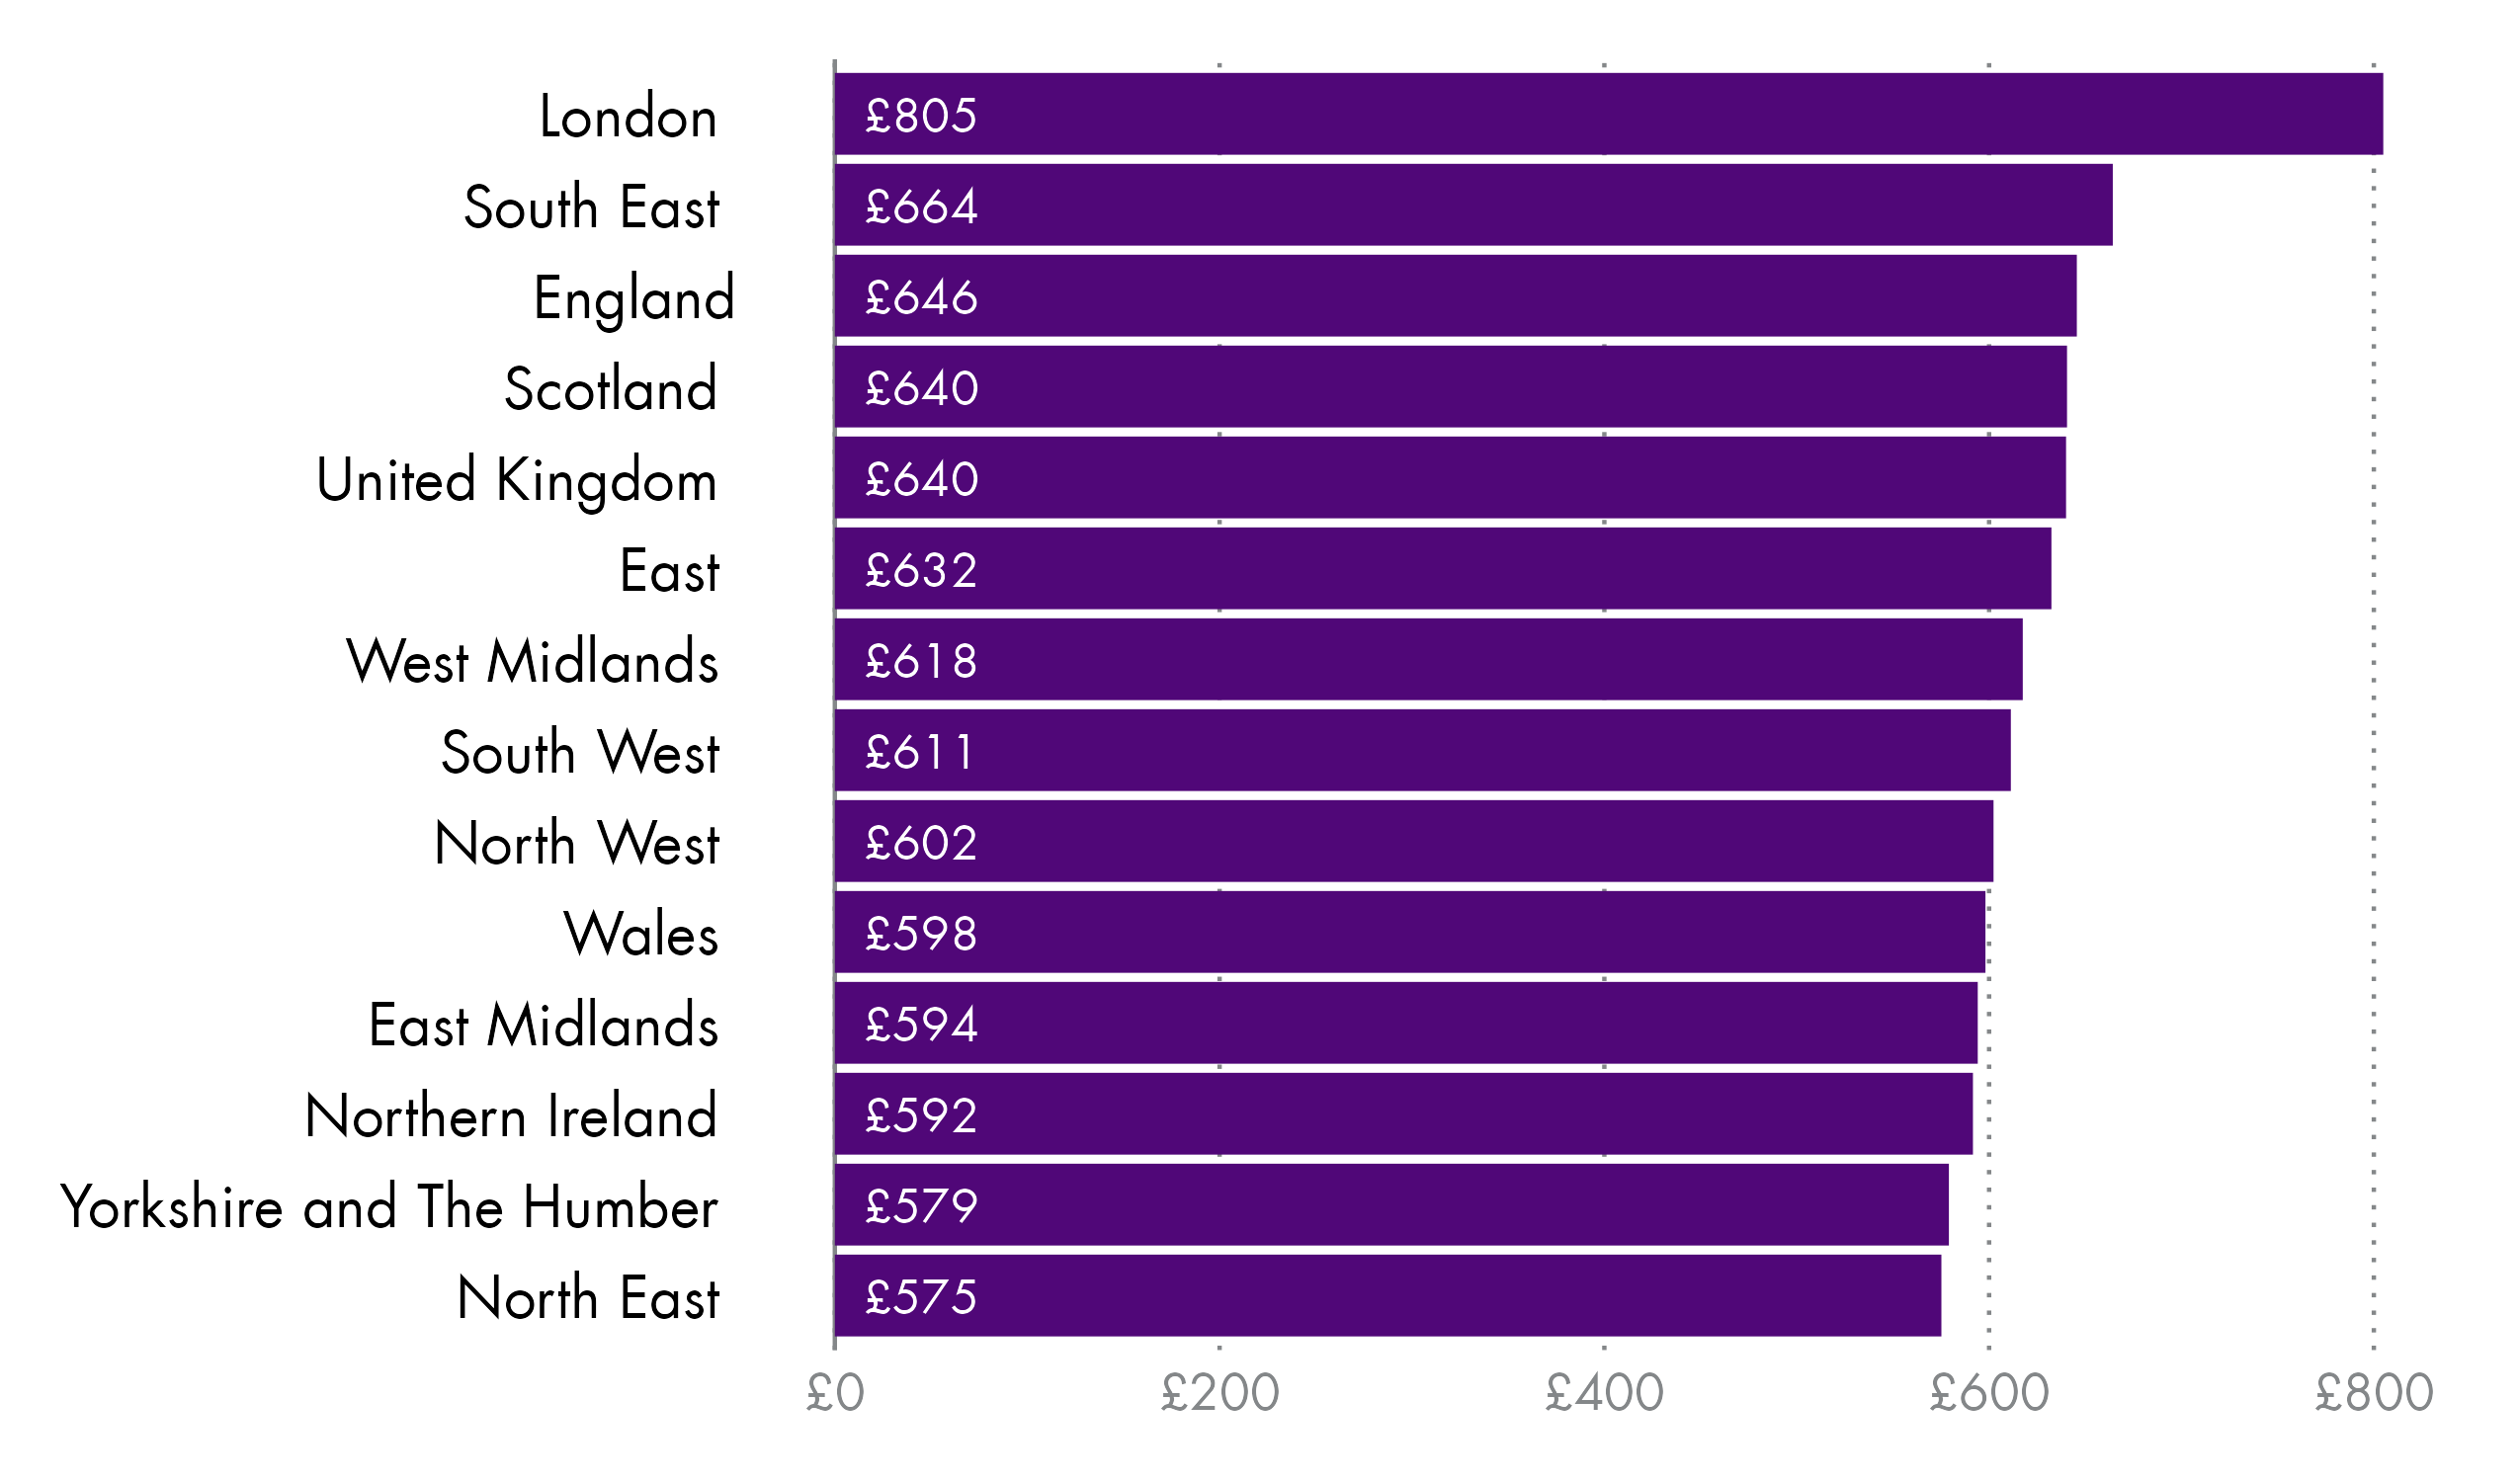 A horizontal bar chart showing the median gross weekly pay for full-time employees by nations and regions of the UK ranked from highest to lowest.